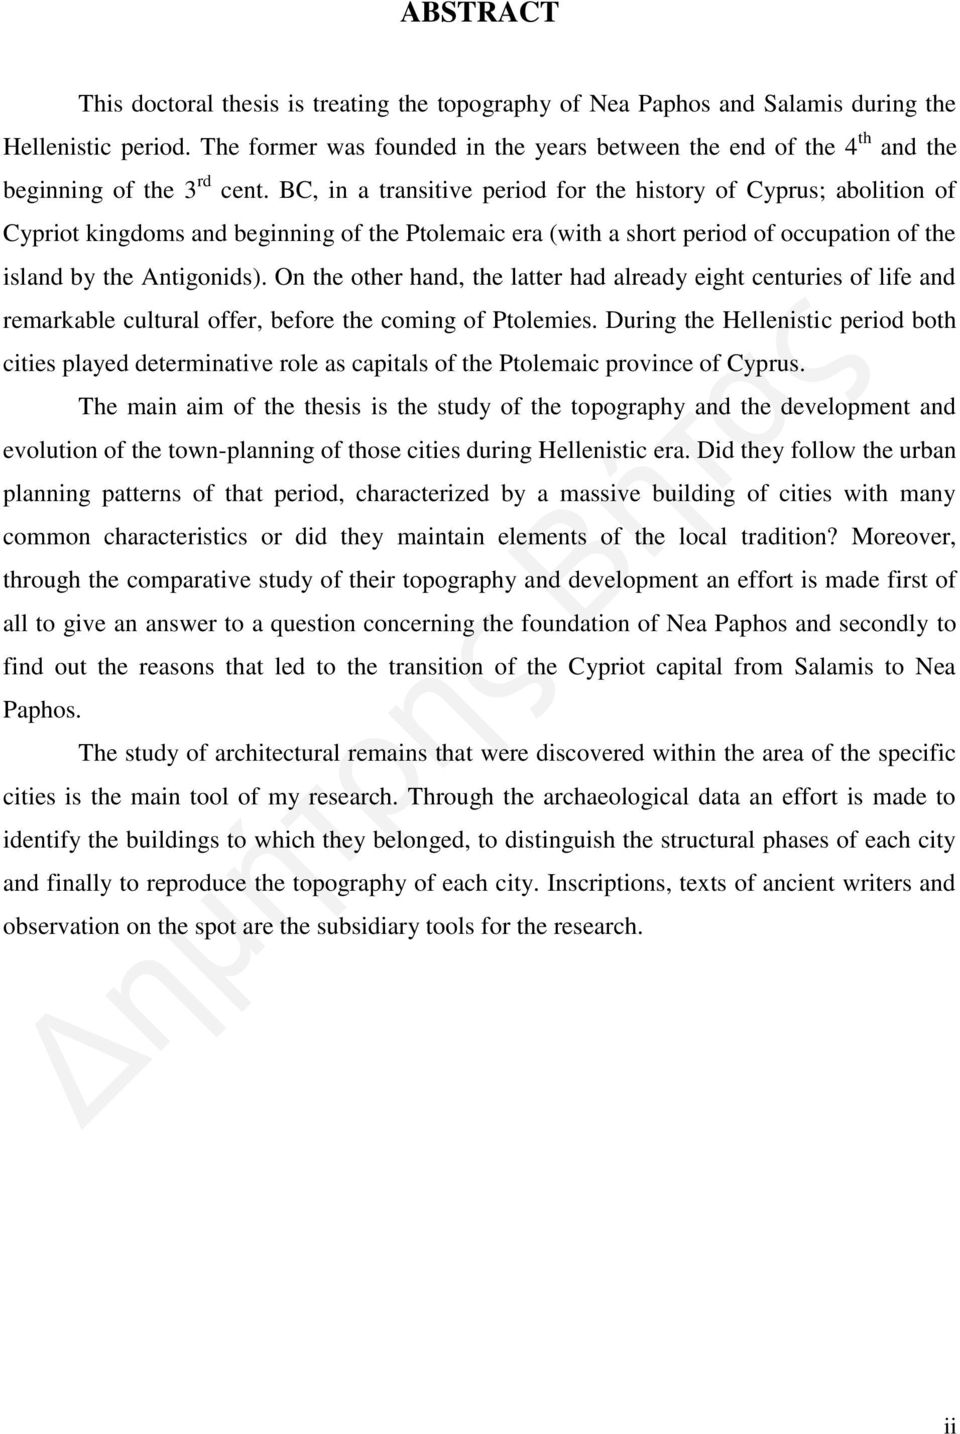 BC, in a transitive period for the history of Cyprus; abolition of Cypriot kingdoms and beginning of the Ptolemaic era (with a short period of occupation of the island by the Antigonids).